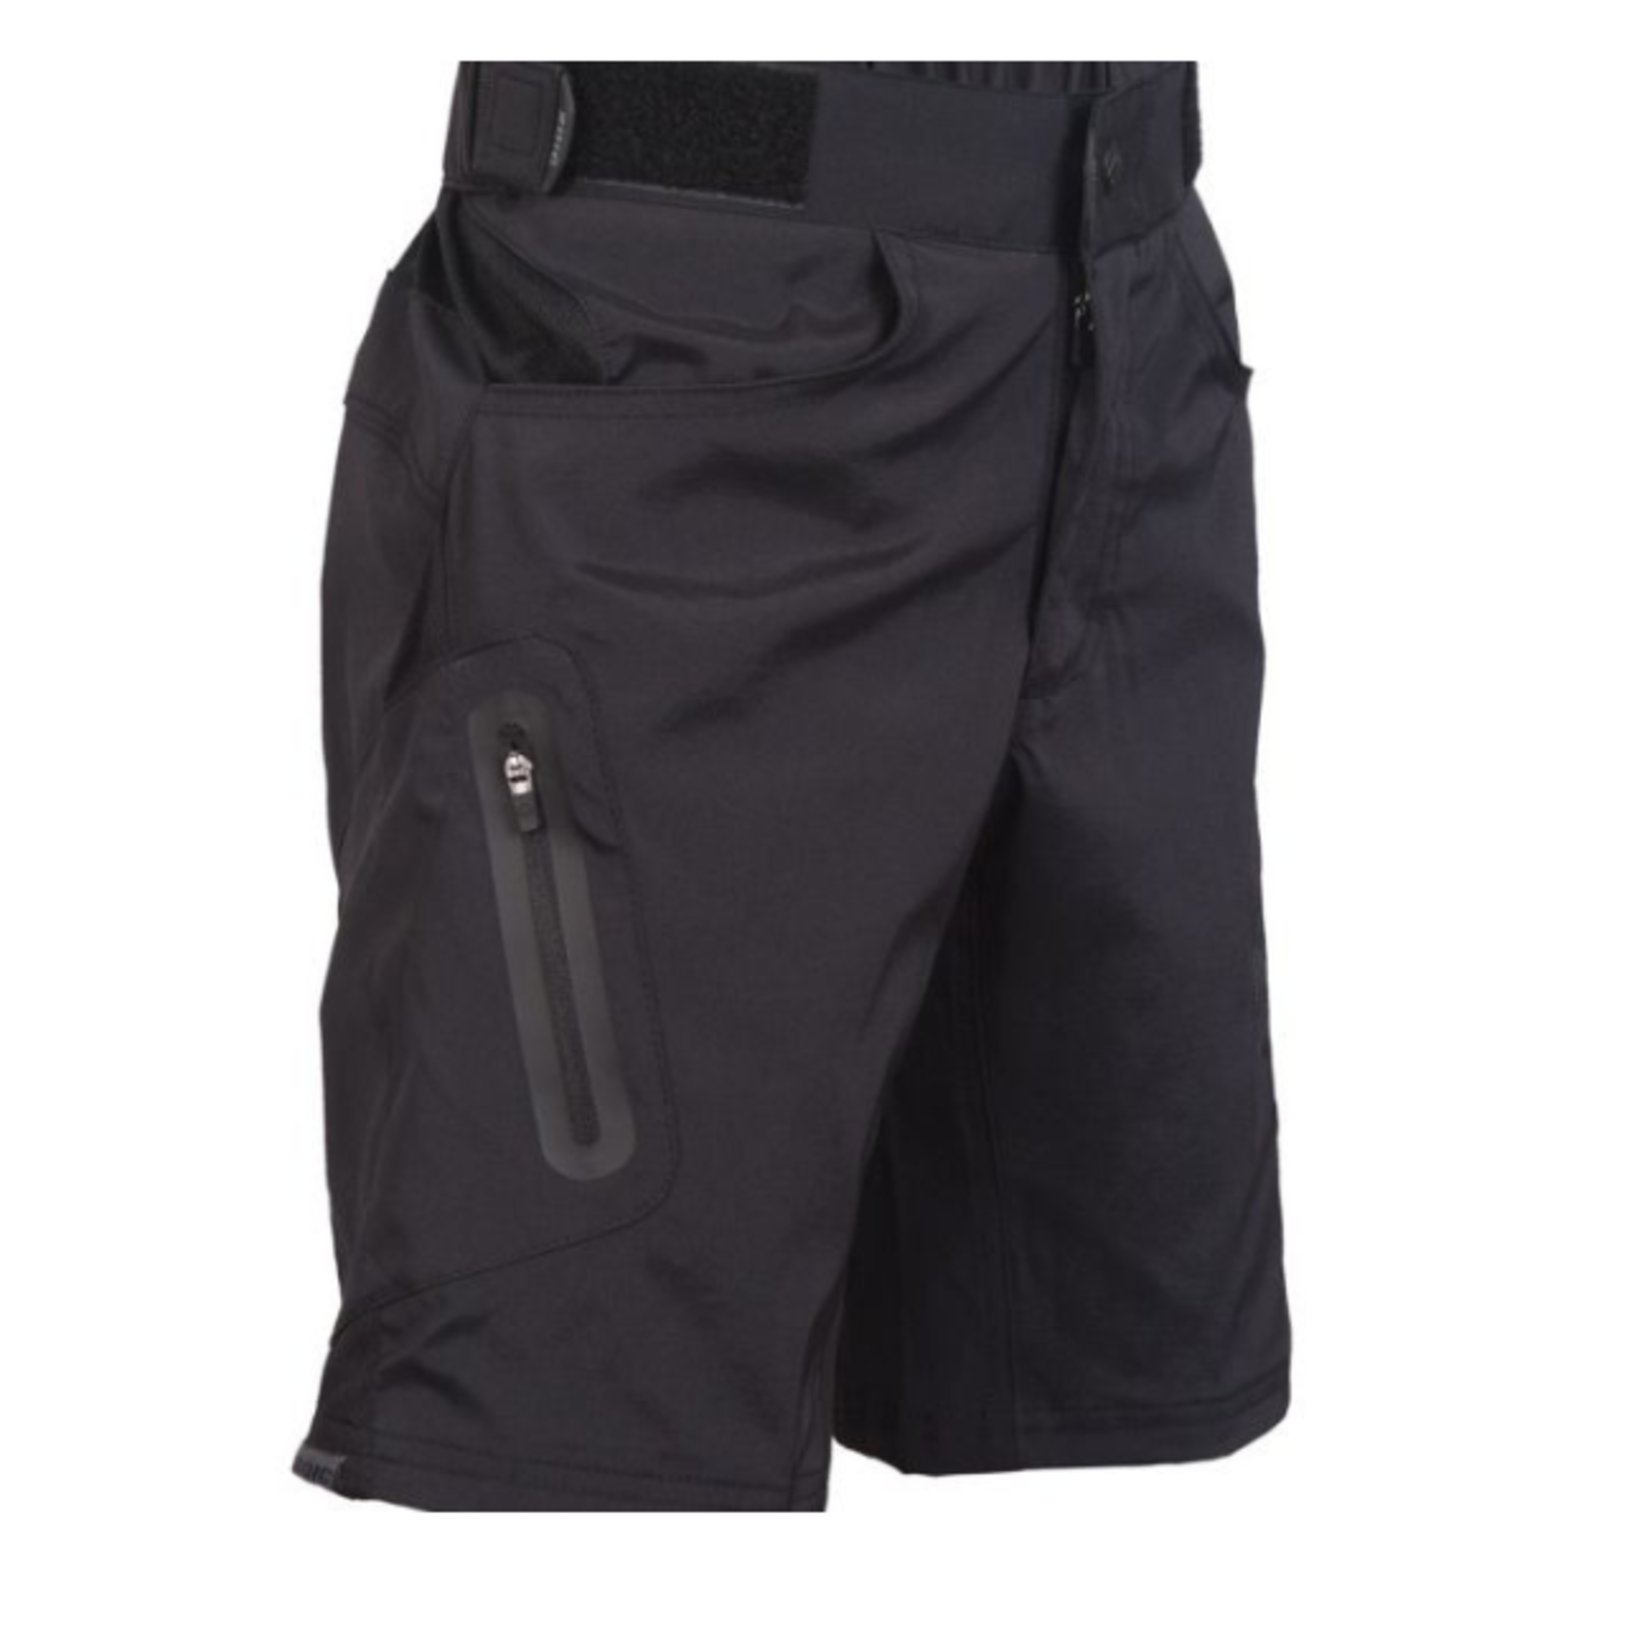 Zoic Zoic  Ether Shorts - Youth (tweens)